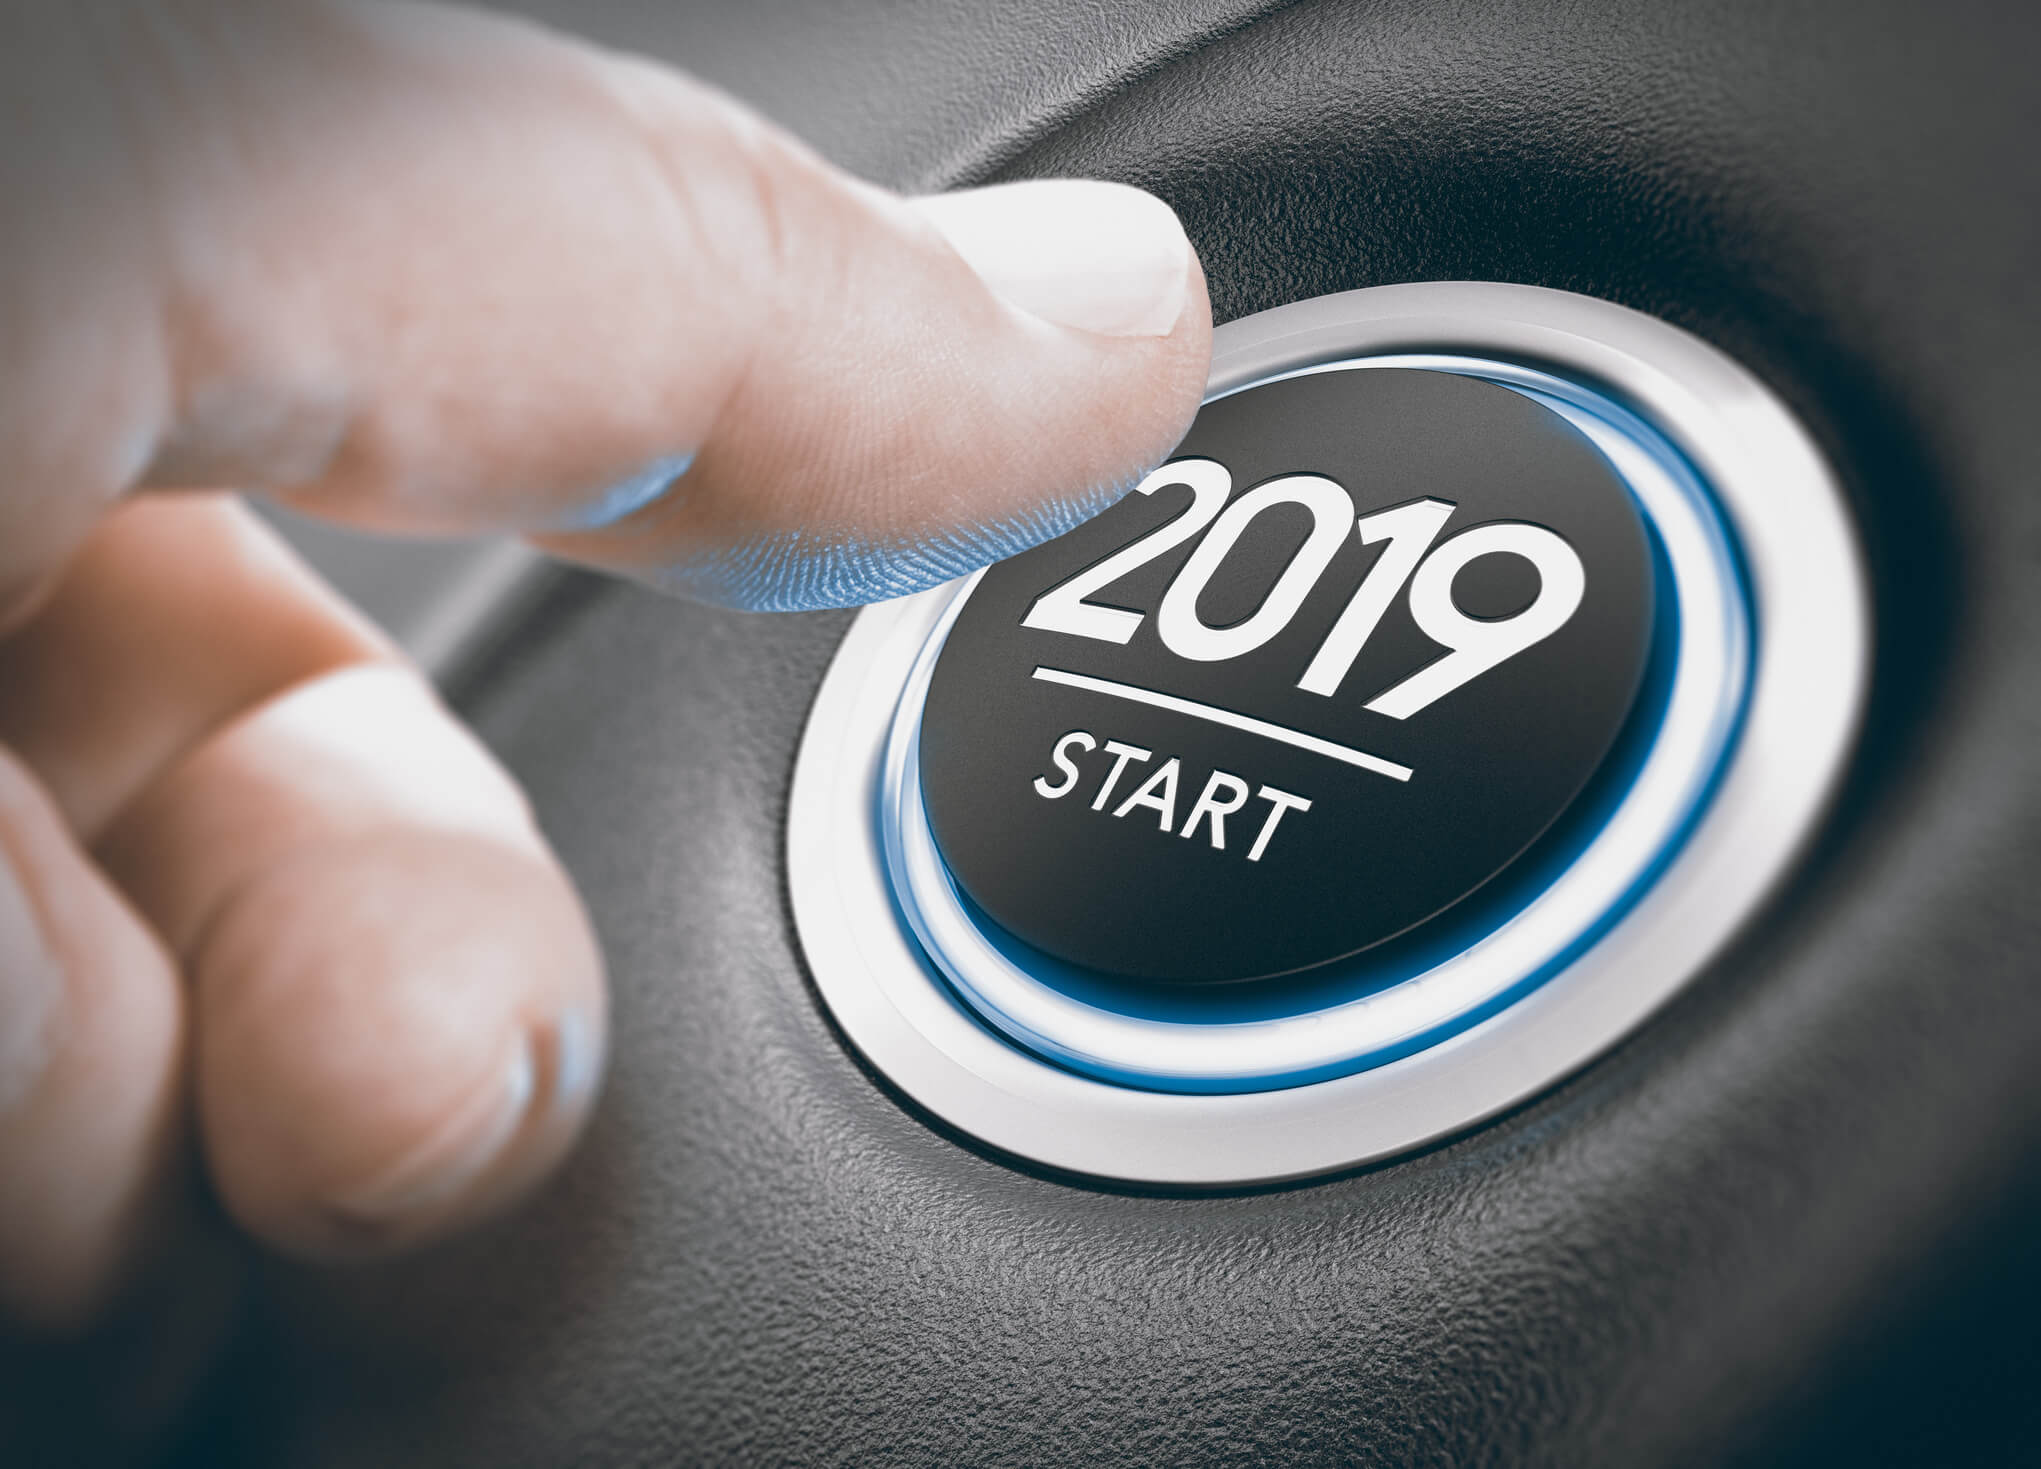 2019 ignition button